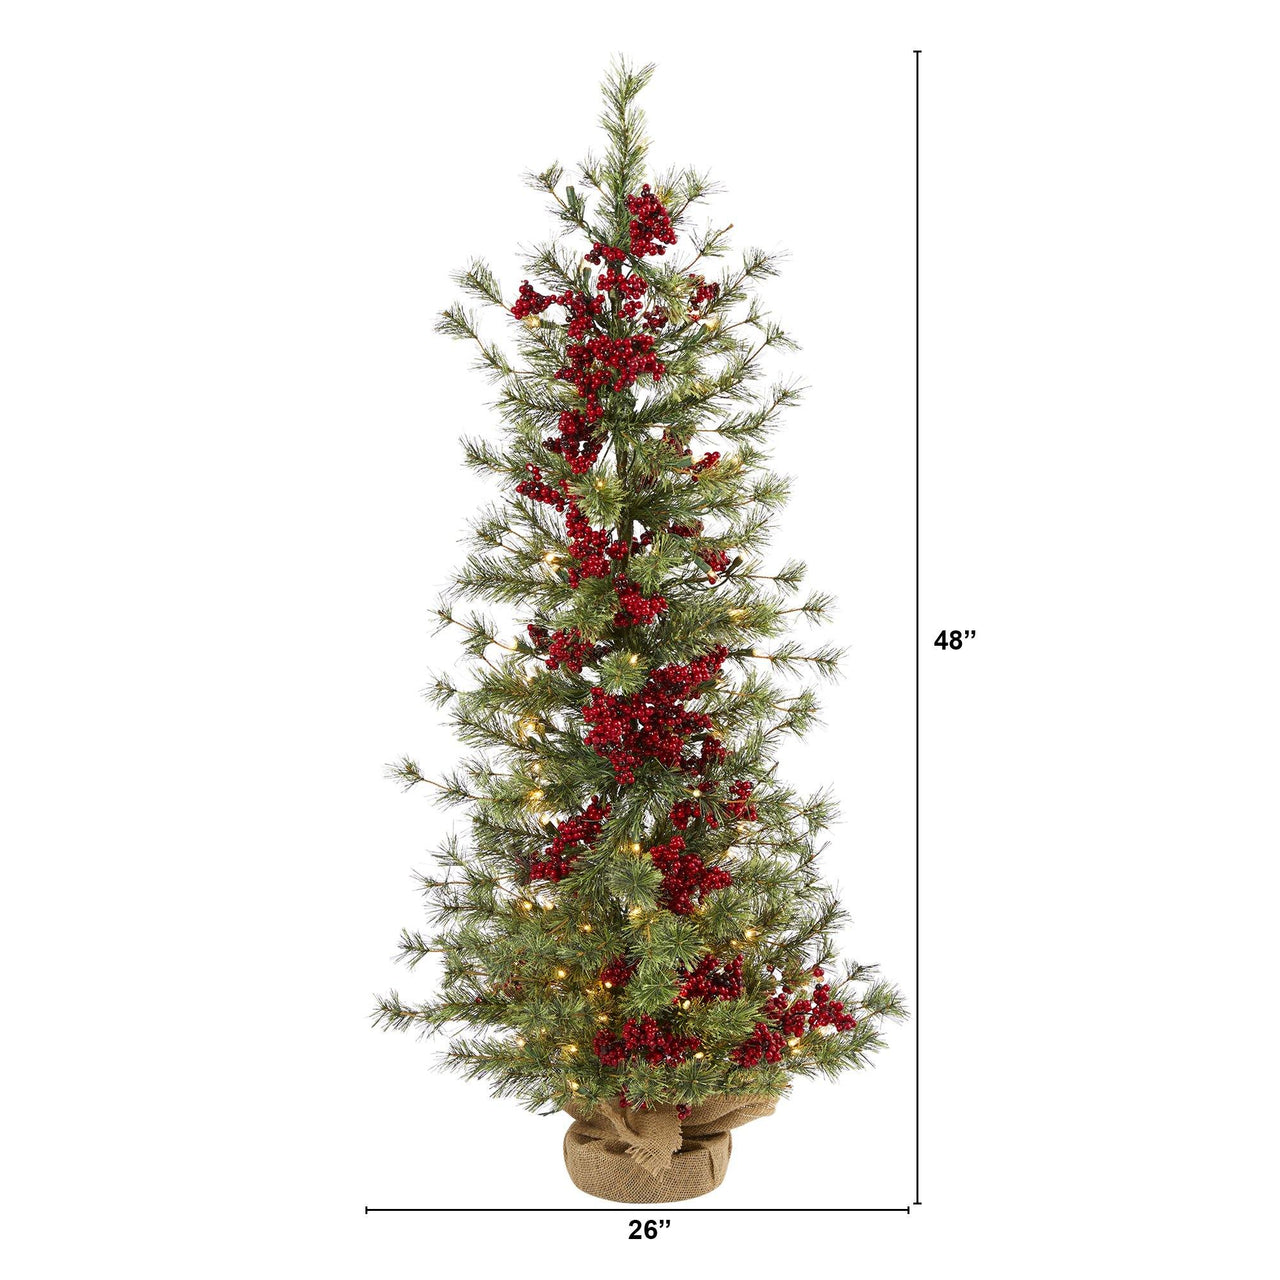 4’ Berry and Pine Artificial Christmas Tree with 100 Warm White Lights and Burlap Wrapped Base - The Fox Decor